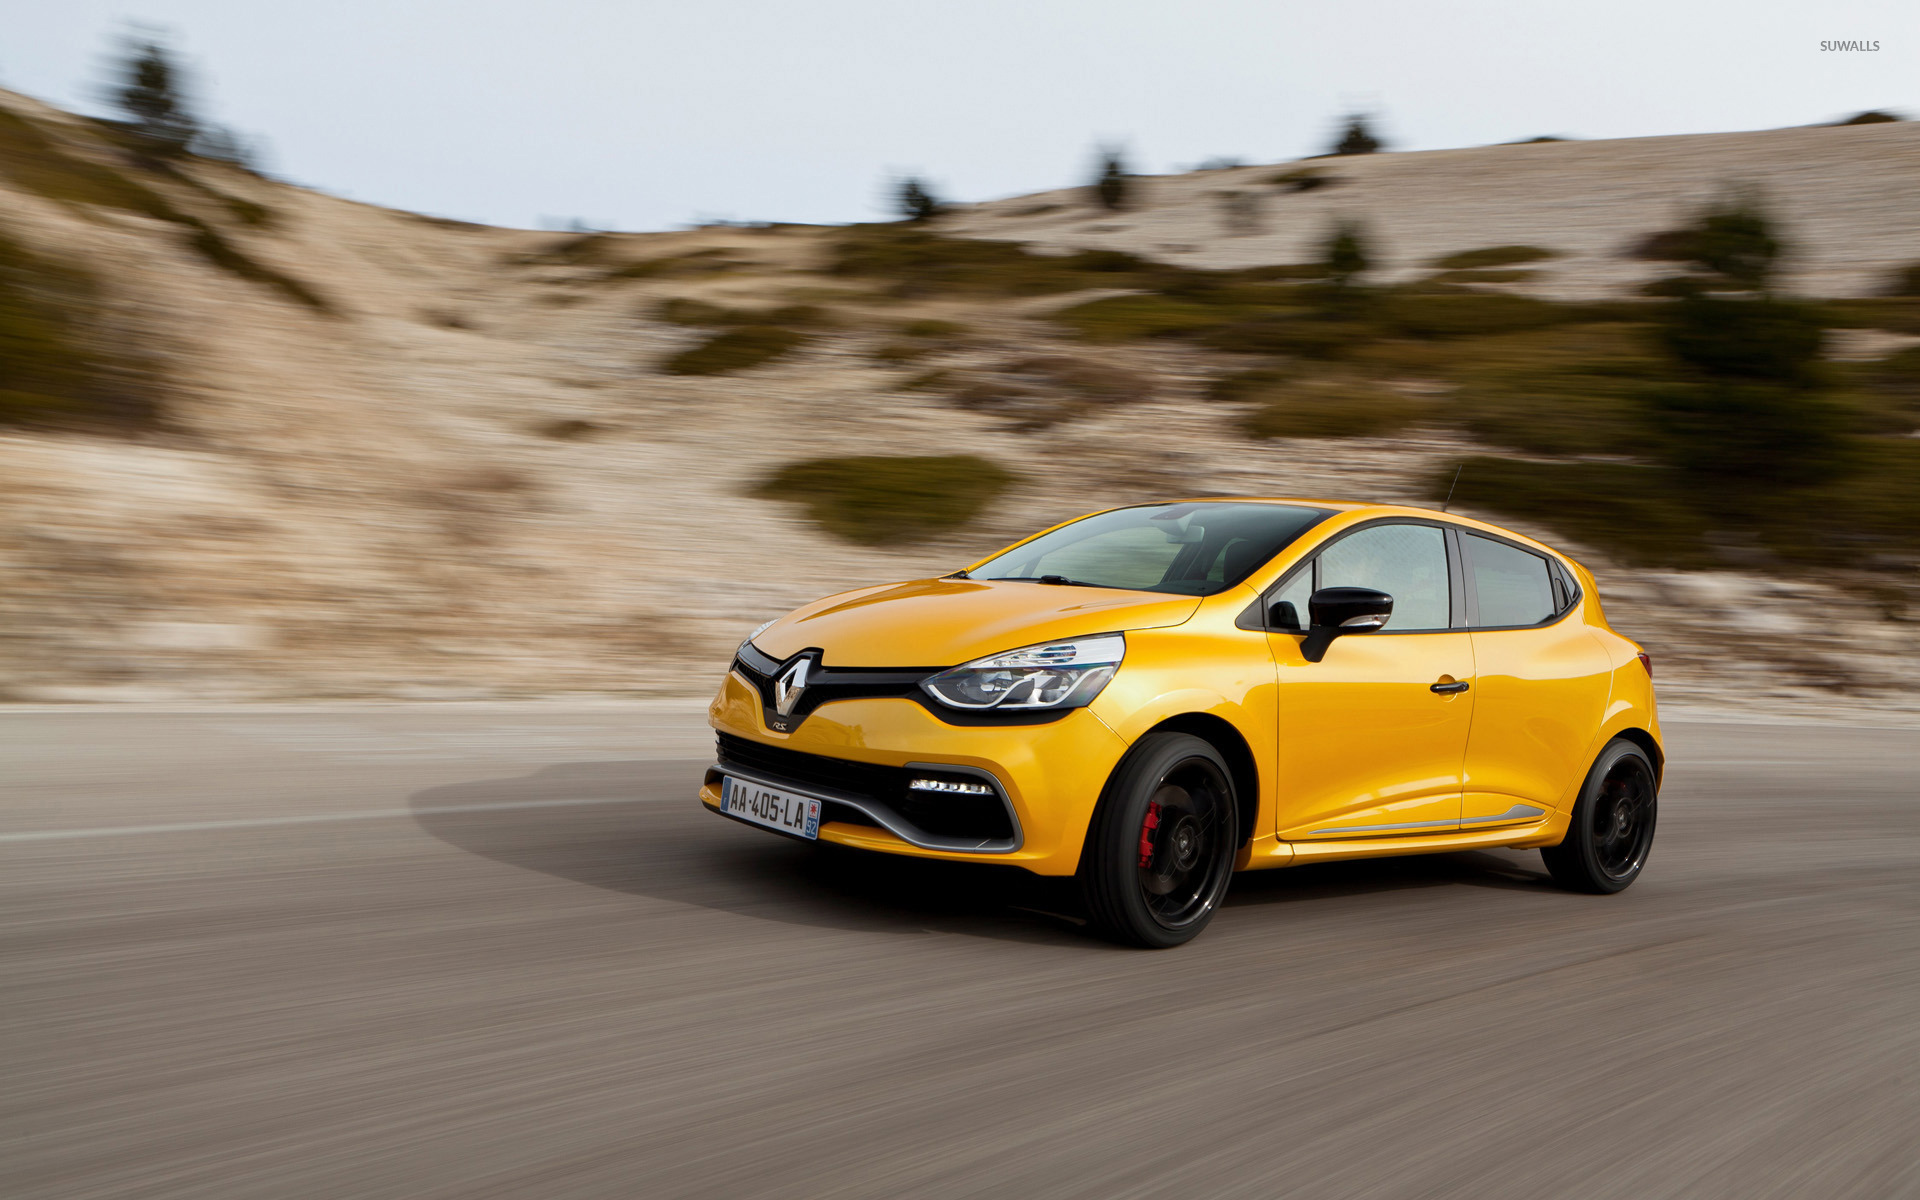 2013 Renault Clio RS 200 wallpaper - Car wallpapers - #18407